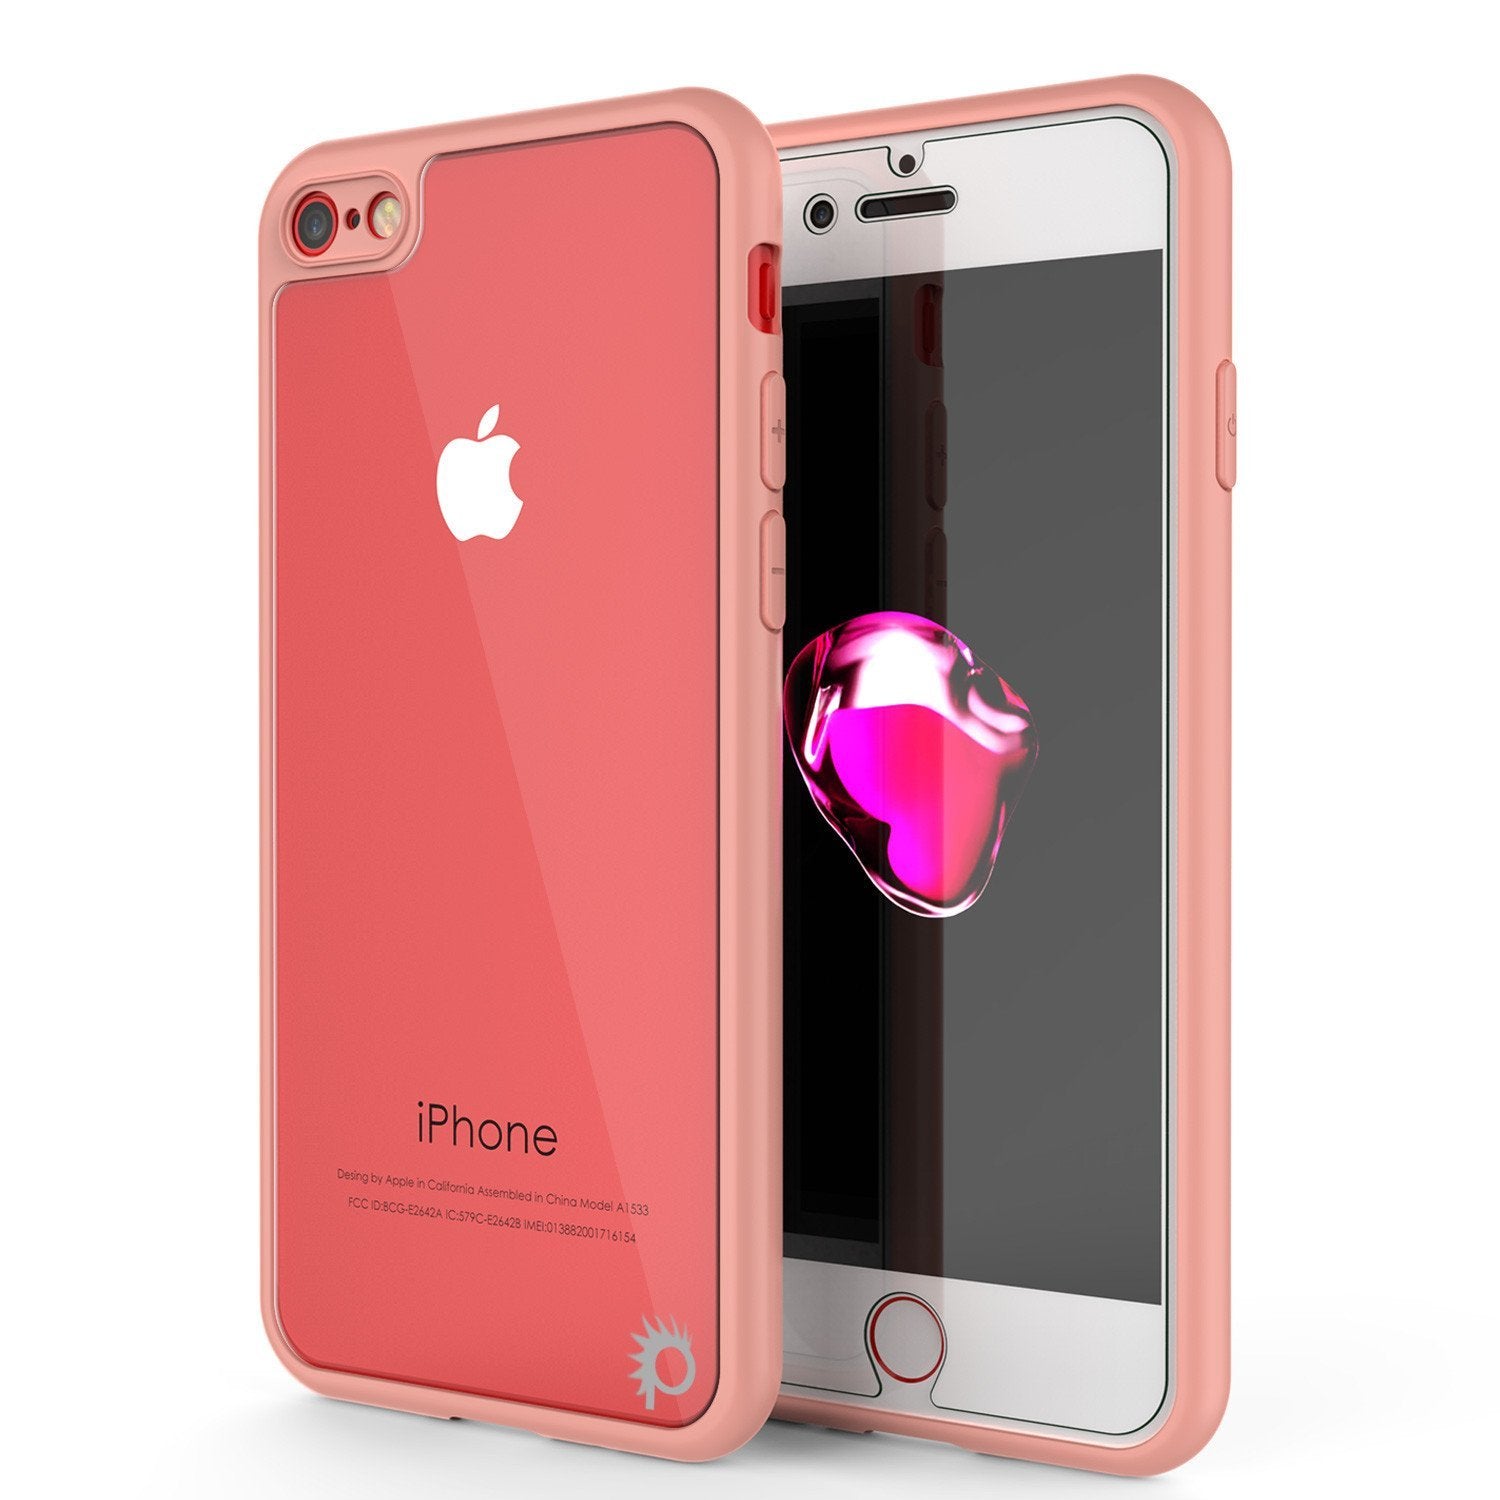 iPhone 8 Case [MASK Series] [PINK] Full Body Hybrid Dual Layer TPU Cover W/ protective Tempered Glass Screen Protector (Color in image: rose)